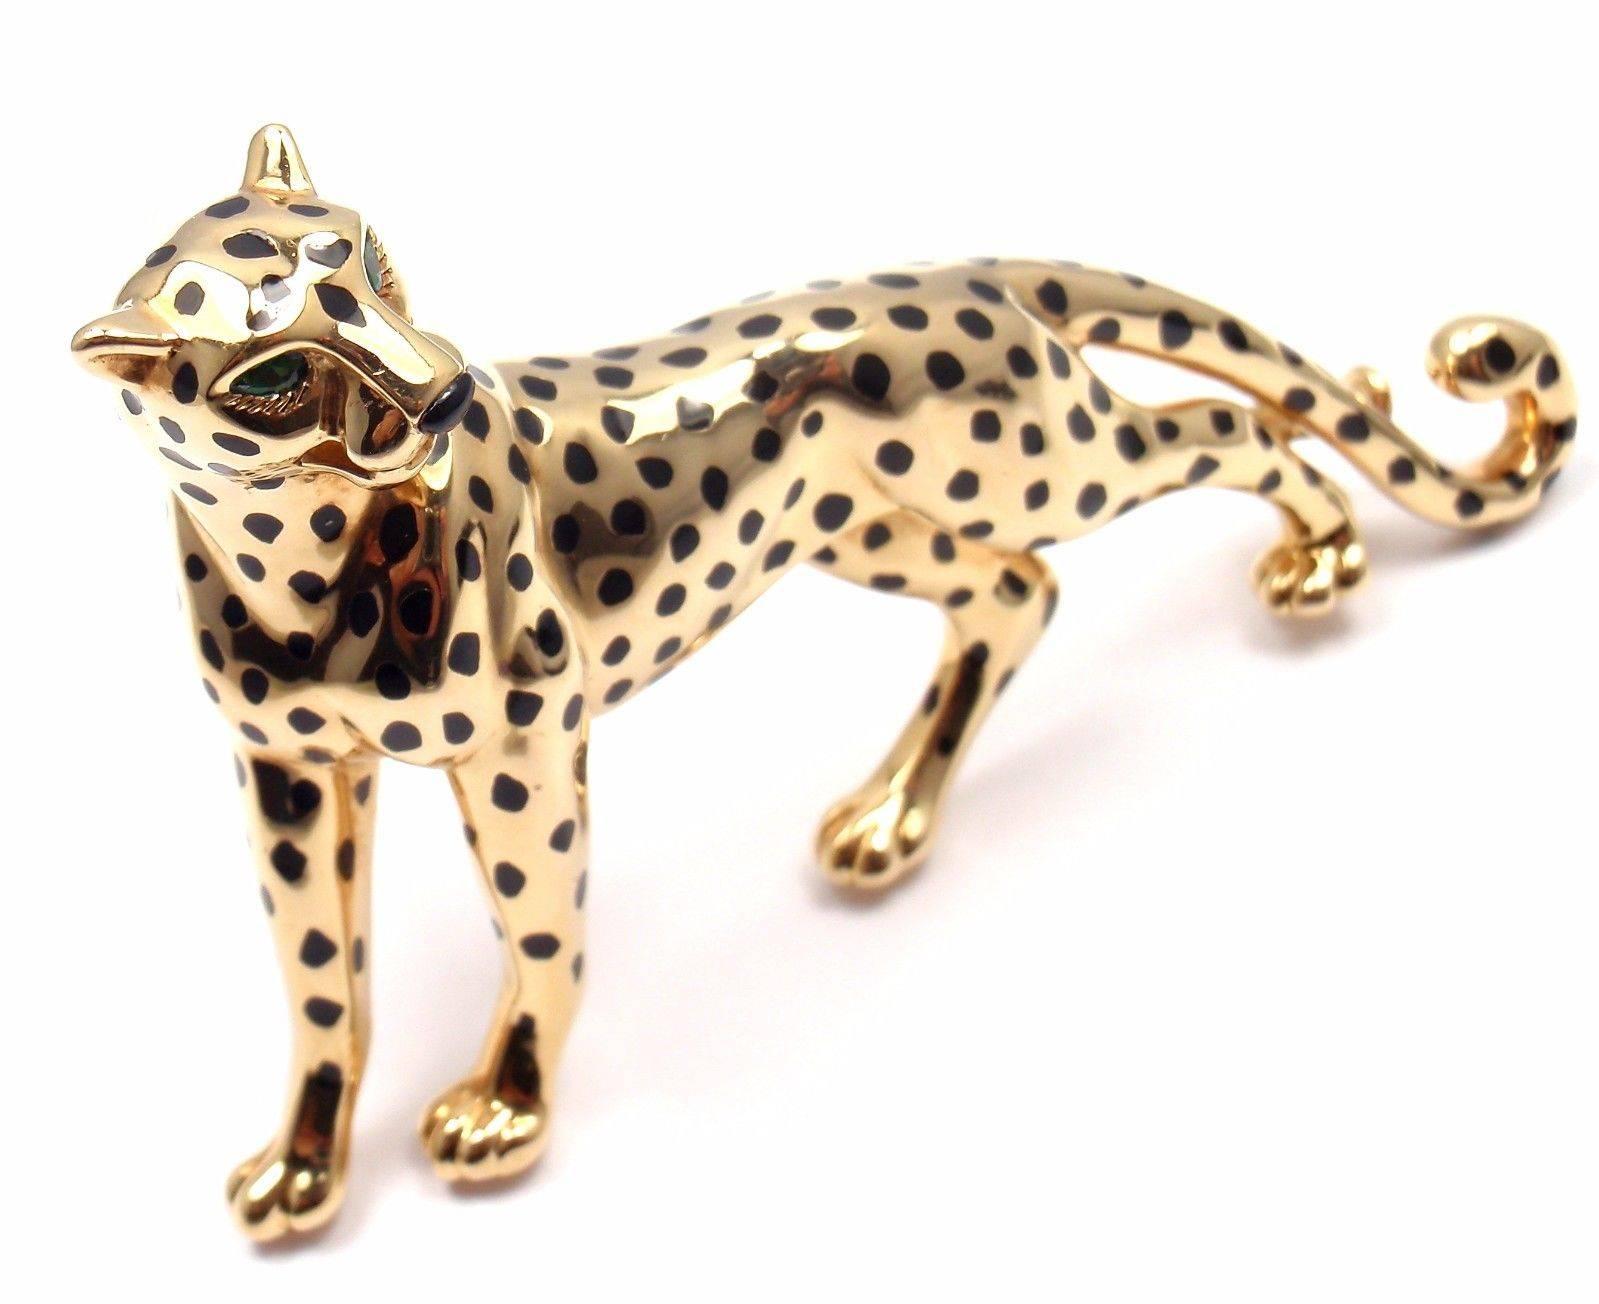 18k Yellow Gold Onyx Emerald Large Panther Pin Brooch by Cartier. 
This brooch comes with an original Cartier box. 
With Black Onyx Spots, Emerald eyes.
 
 Details: 
 Measurements: 2 1/2" x 1 3/4"
 Weight: 32.6 grams
 Stamped Hallmarks: